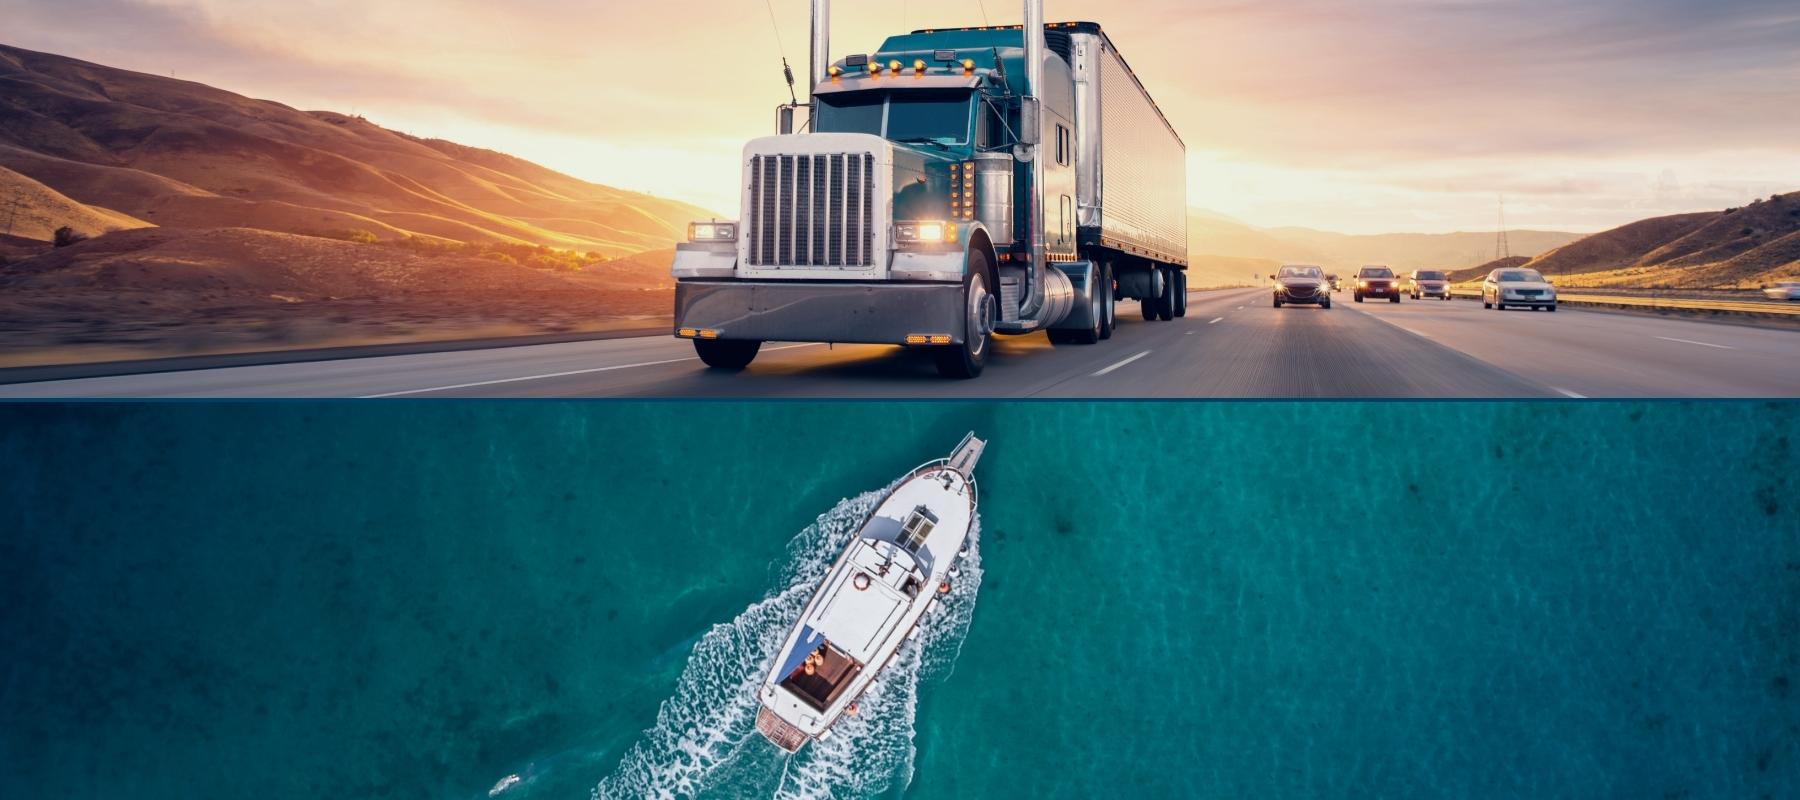 picture of a truck on a highway and a birds-eye view of a boat